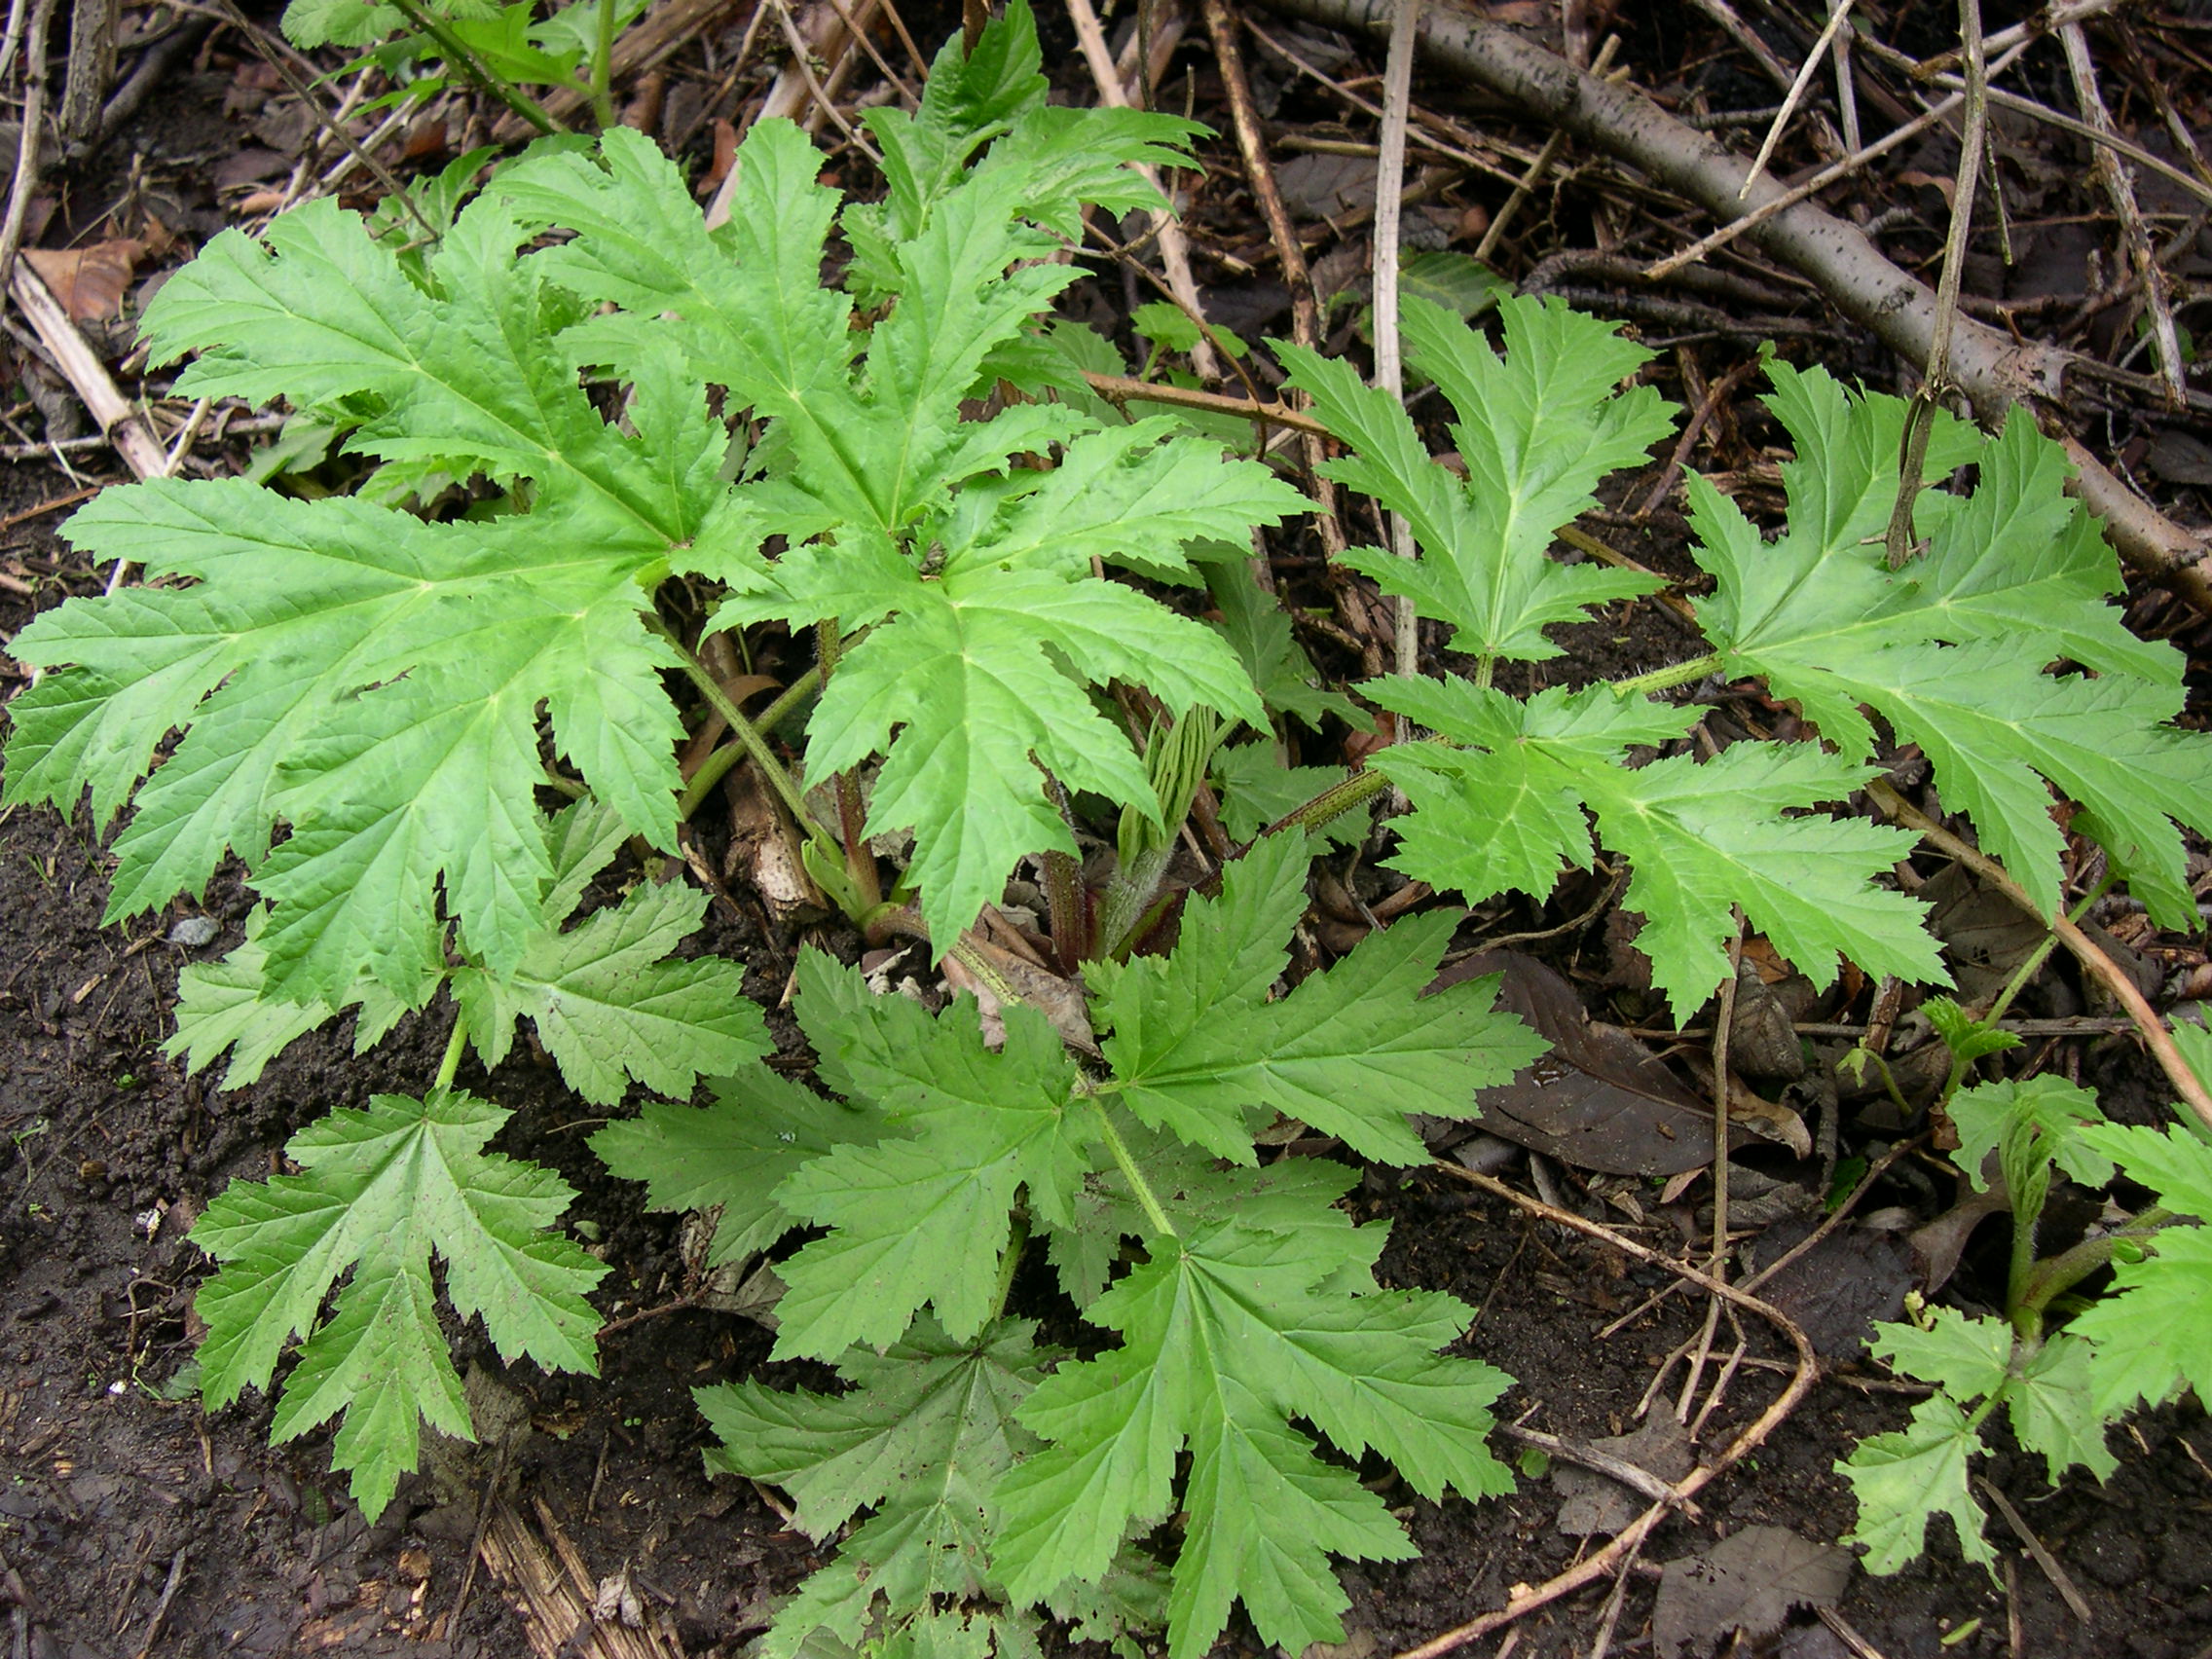 Giant hogweed young plant